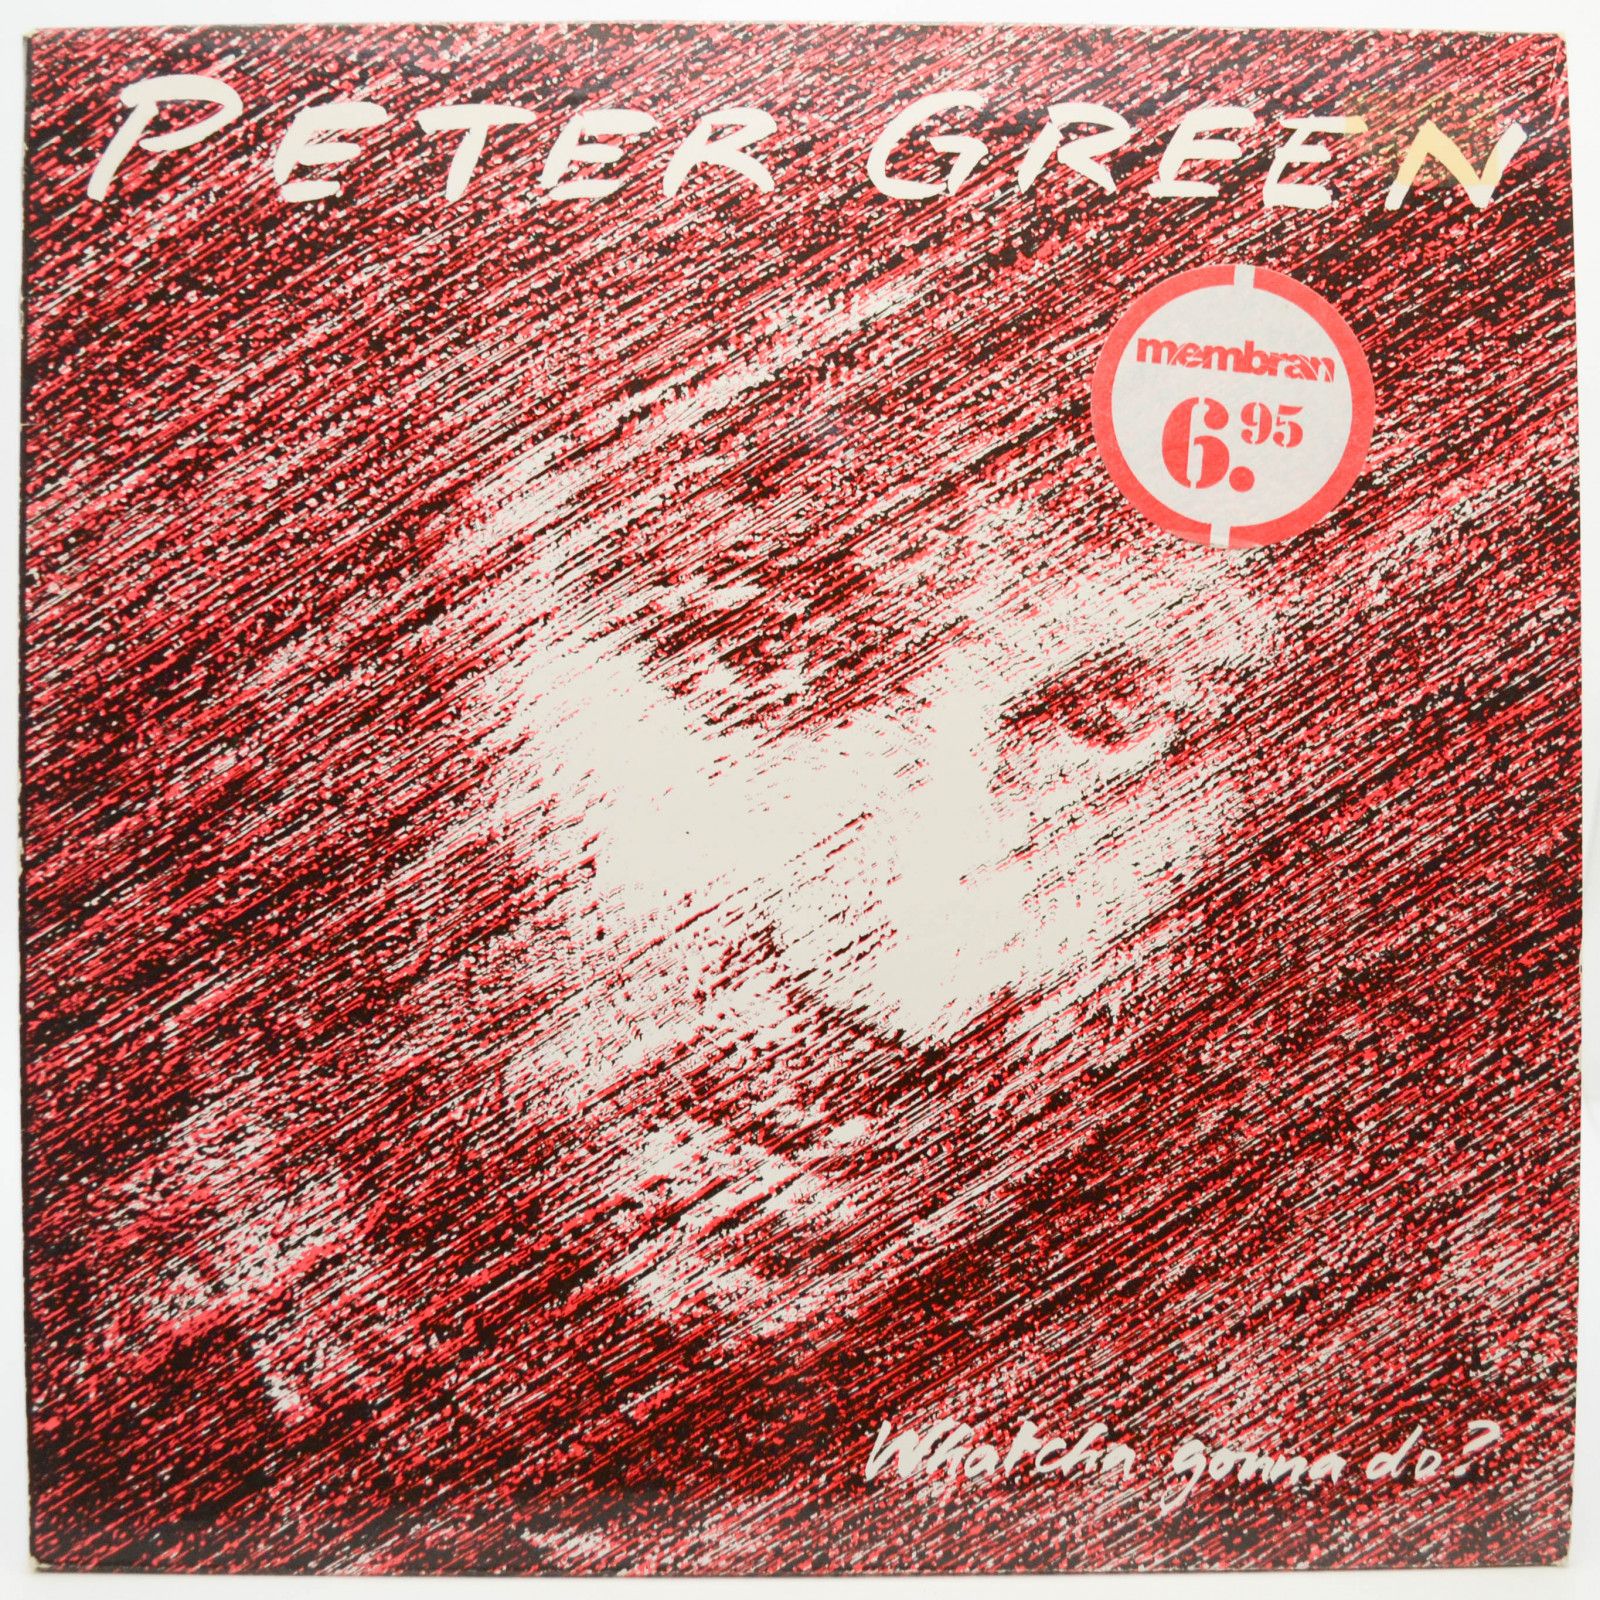 Peter Green — Whatcha Gonna Do?, 1981